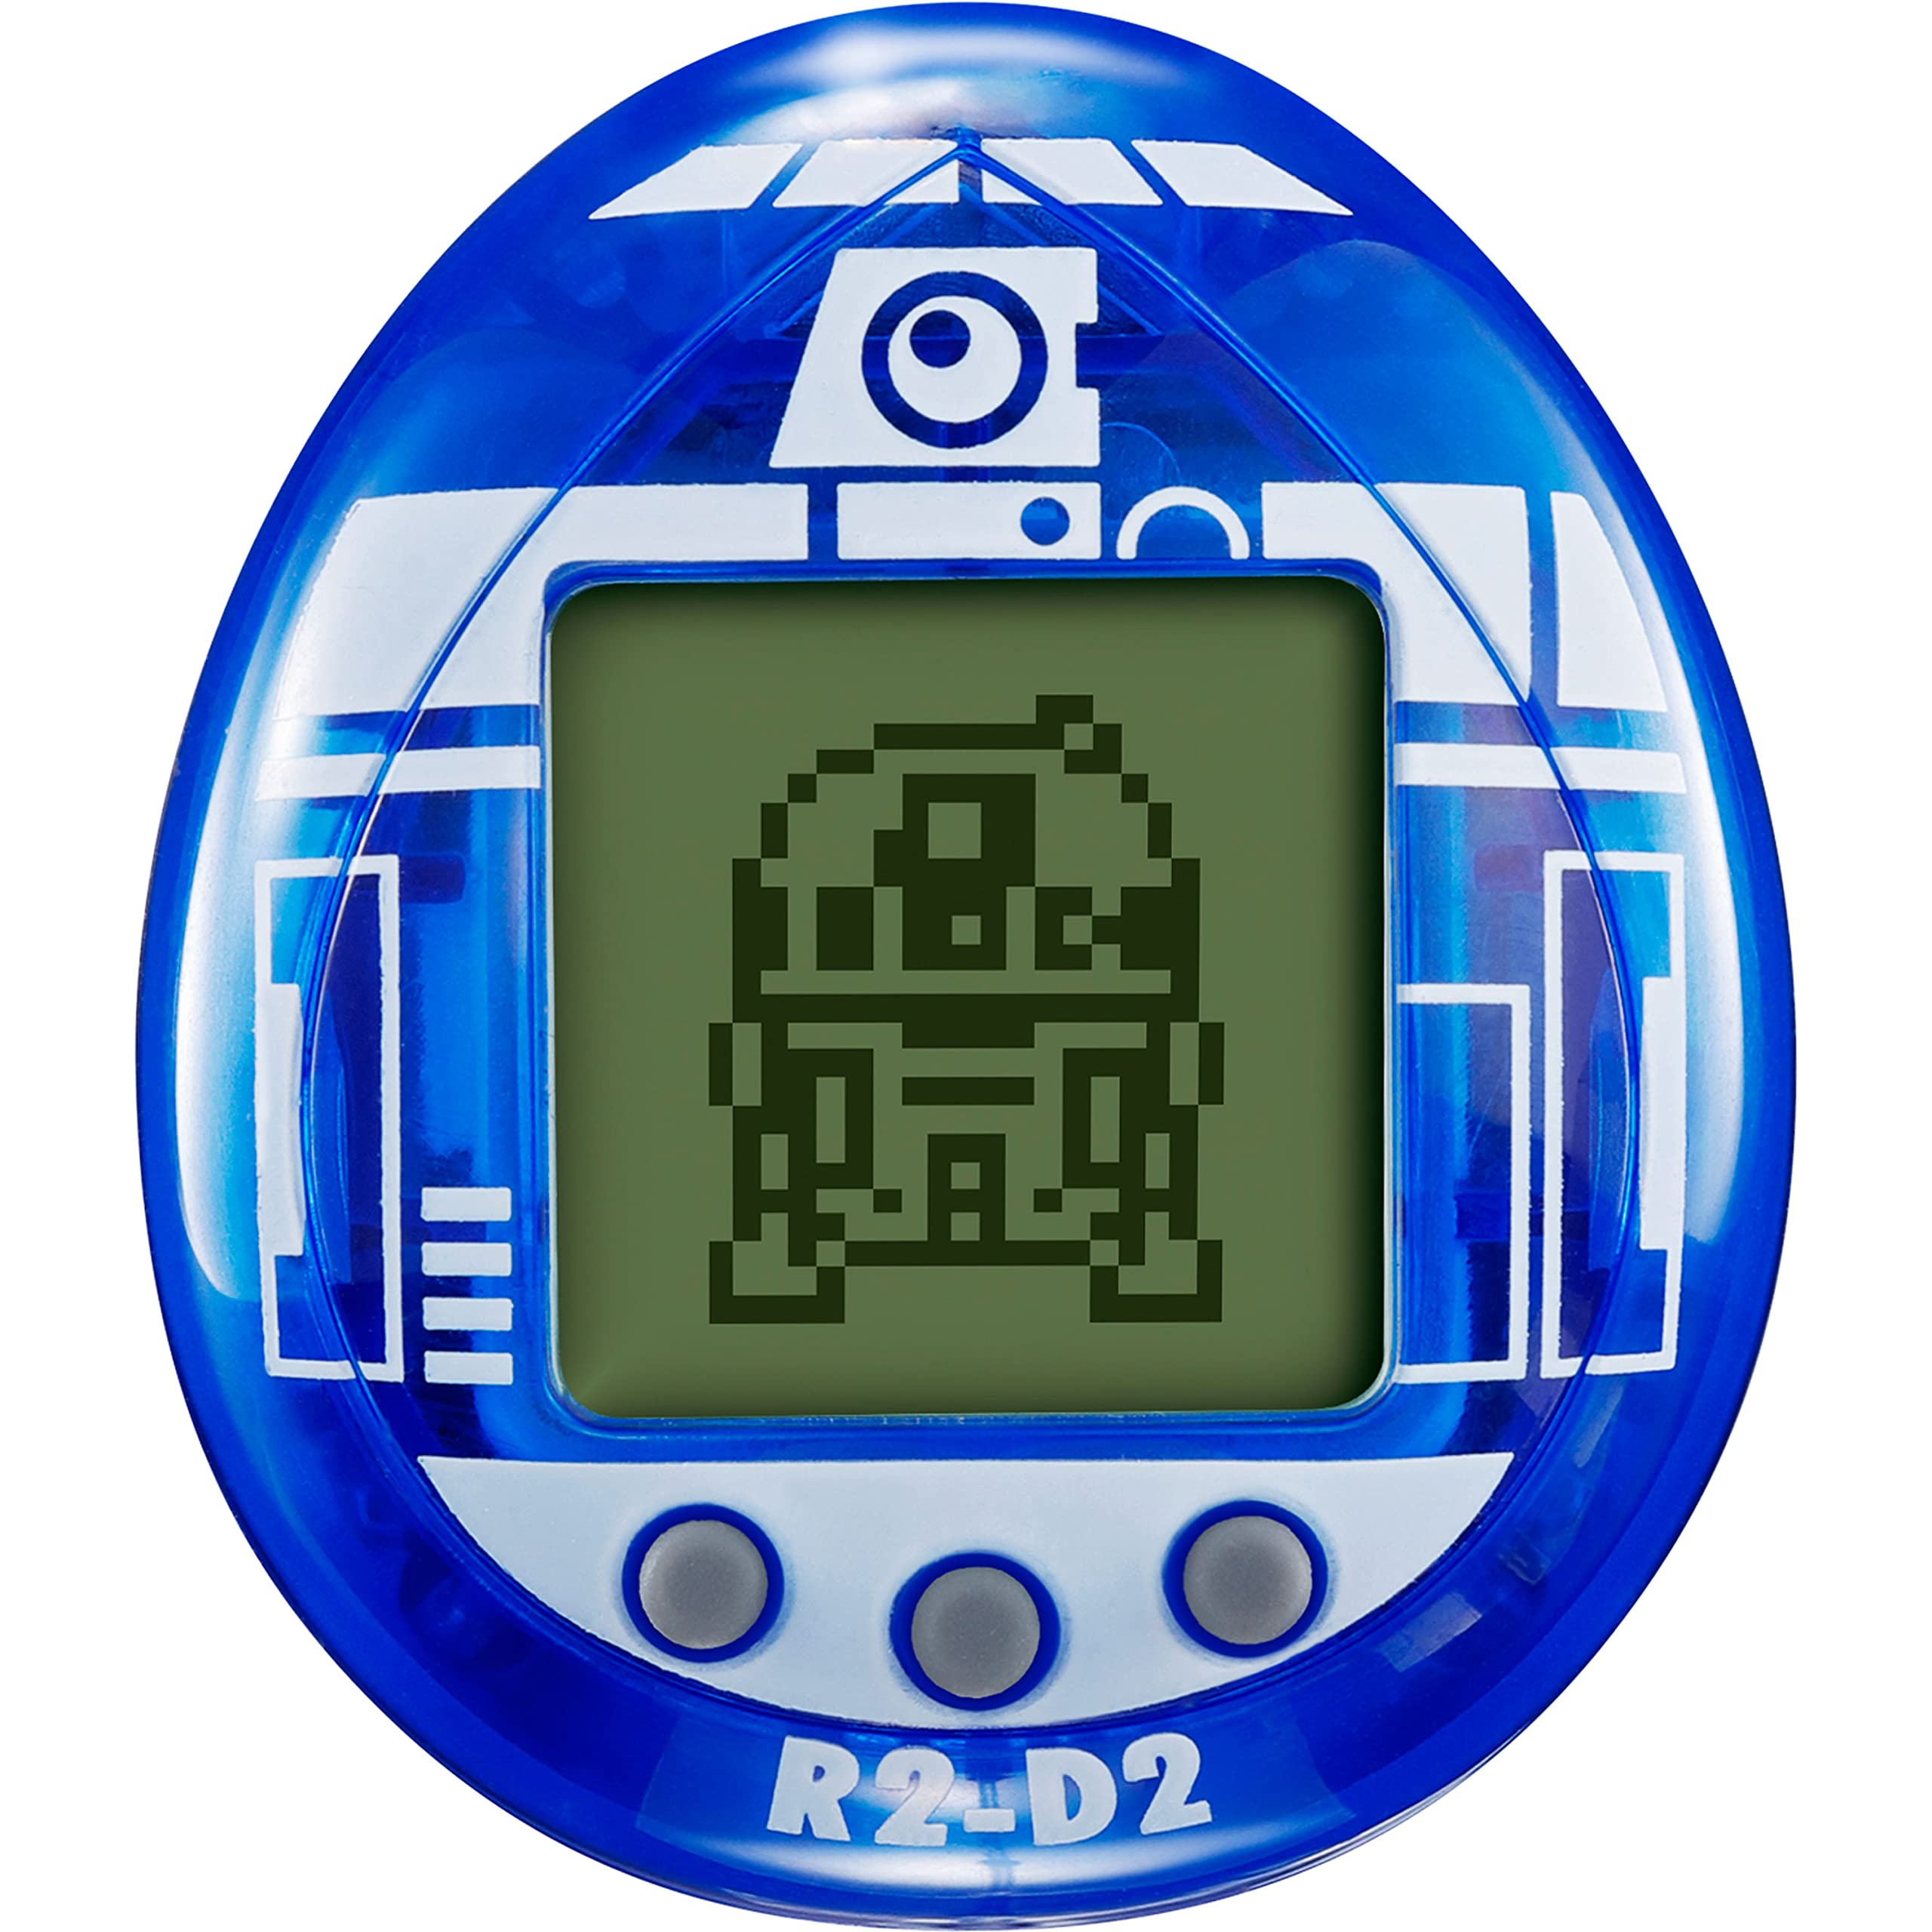 Tamagotchi 88822 Star Wars R2D2 Virtual Pet Droid with Mini-Games, Animated Clips, Extra Modes & Key Chain-(Blue), Multicolour